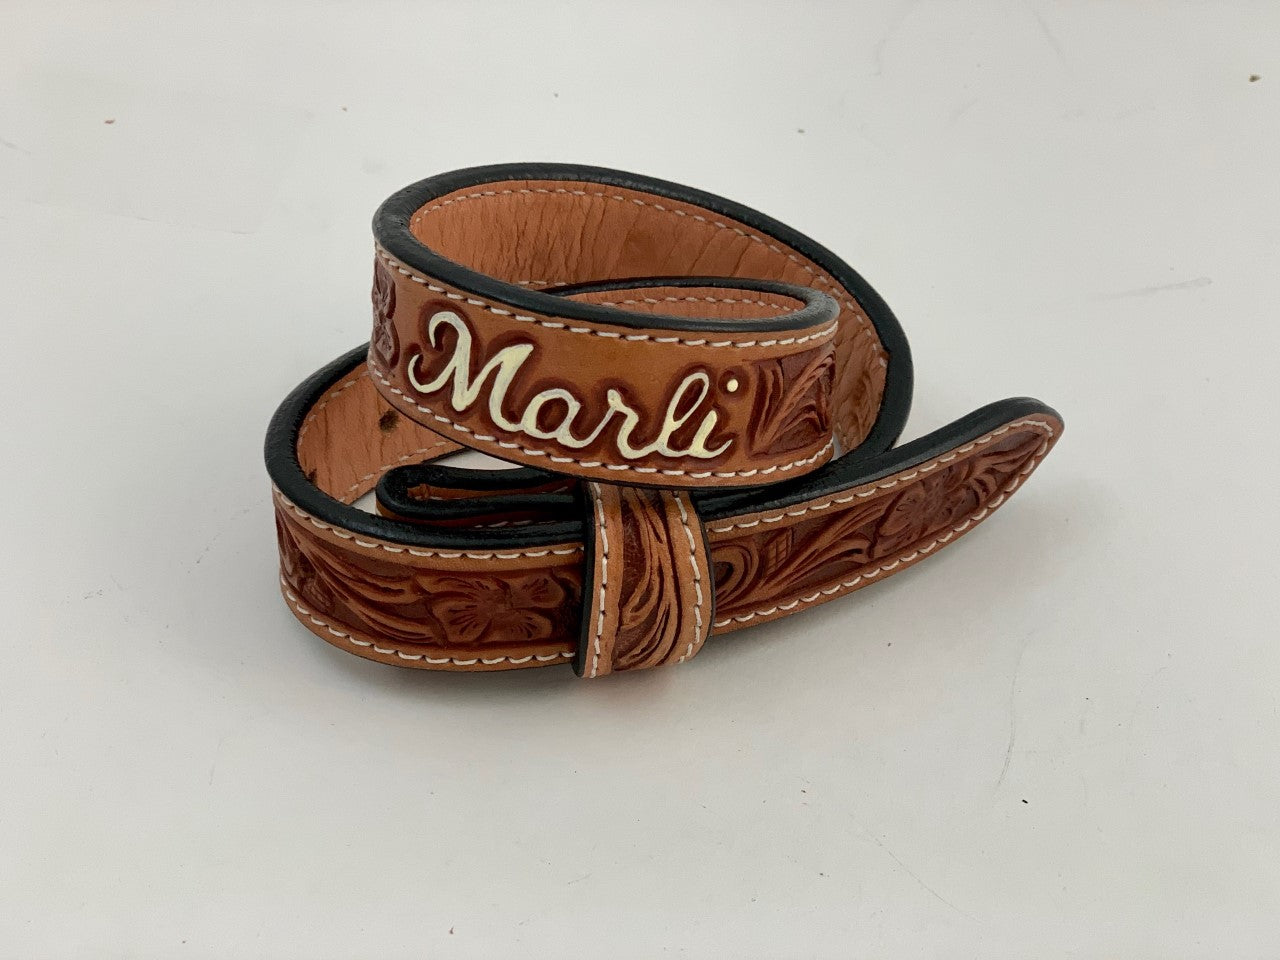 Marli Baby Belt. Antique Floral Tooling with Name.